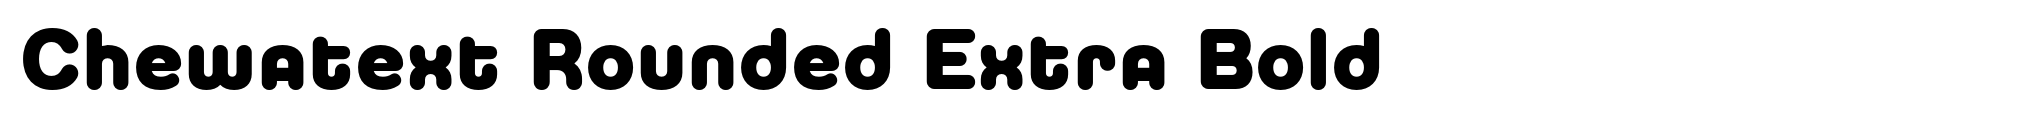 Chewatext Rounded Extra Bold image